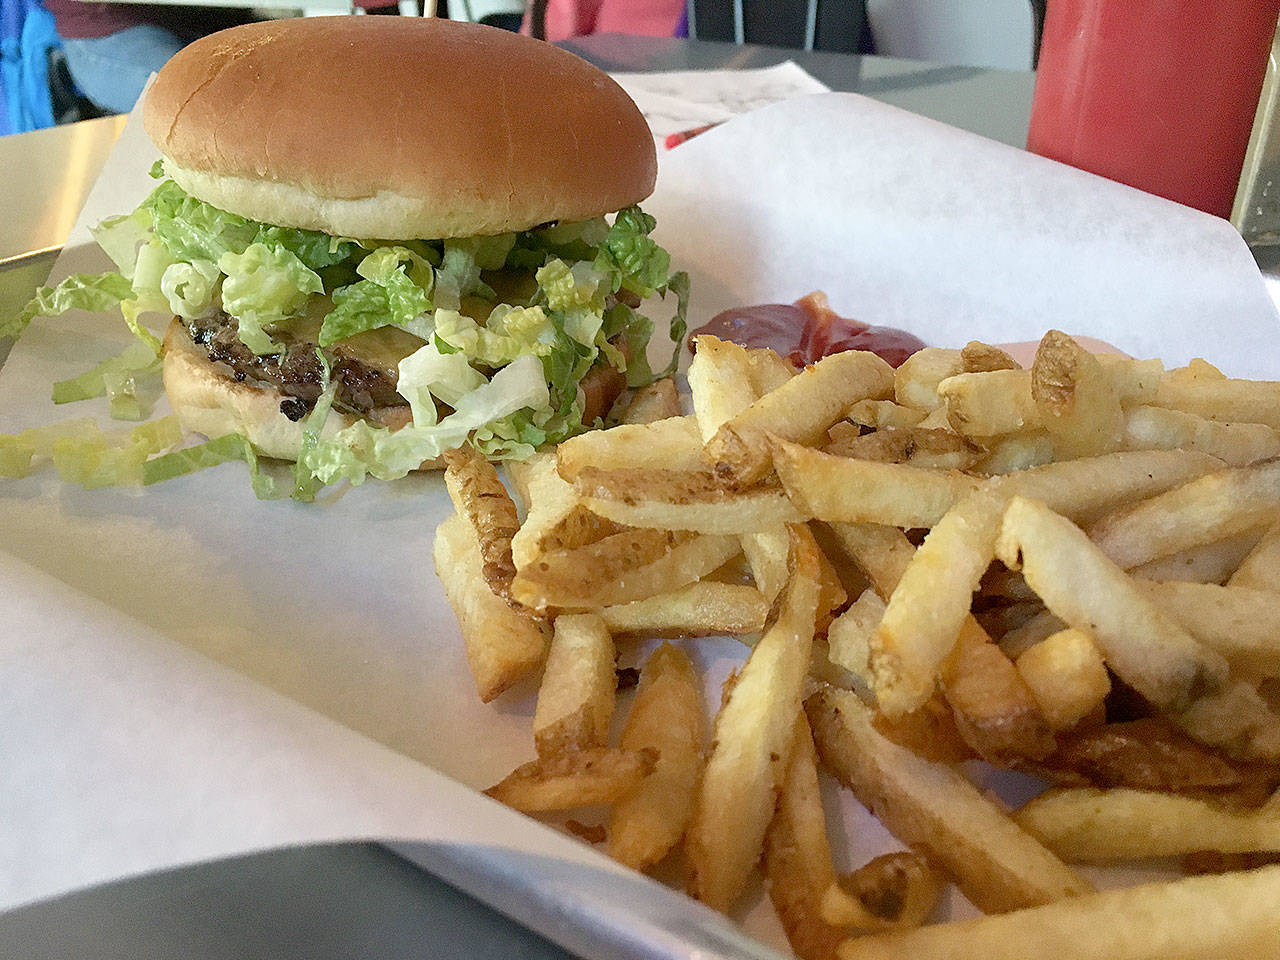 Blu Burgers & Brew in Mukilteo offers a daily lunch special of a classic cheeseburger with a quarter-pound patty, cheddar cheese slice, shredded romaine lettuce, pickle, tomato and house sauce, a side order of fries and a drink for $8.50. (Ben Watanabe / The Herald)